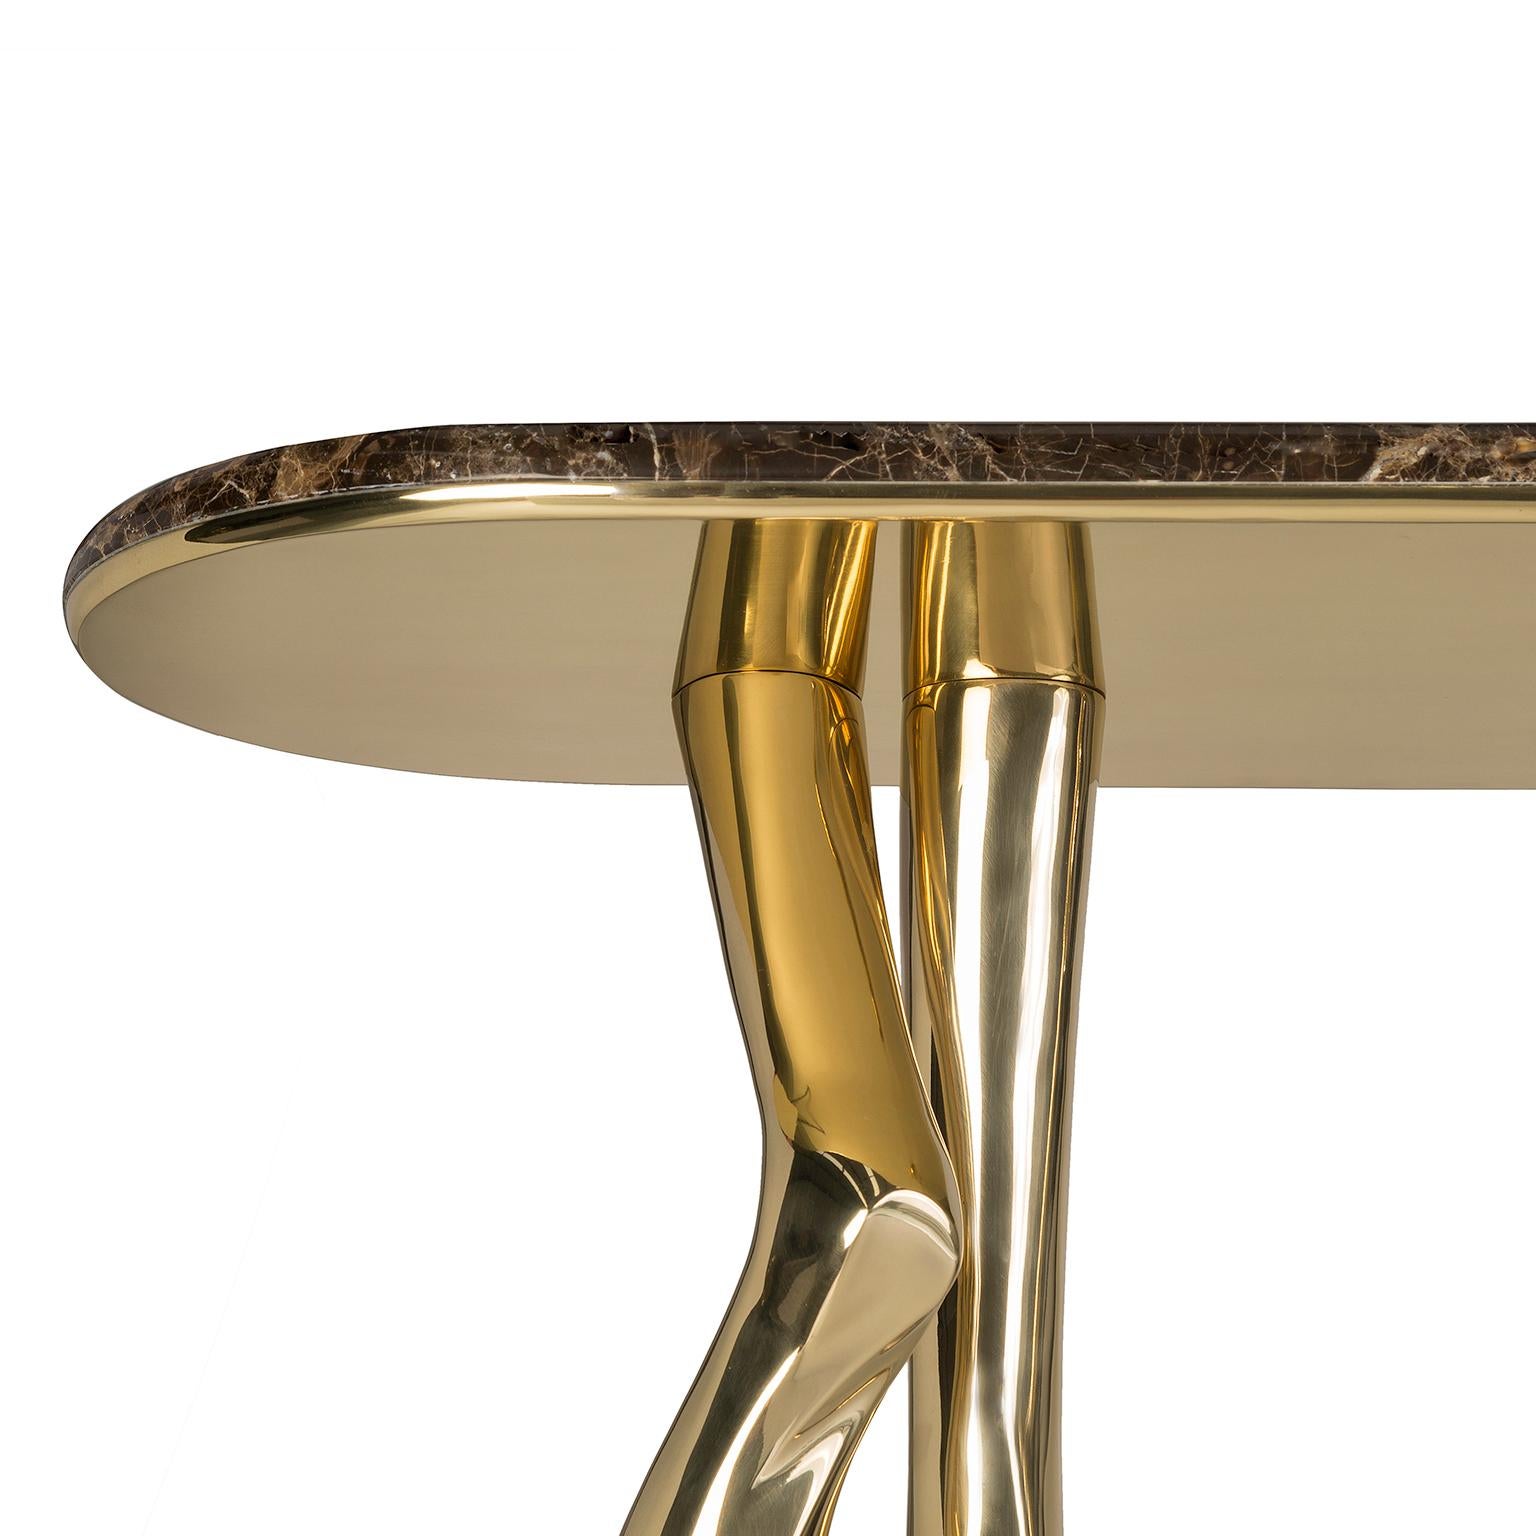 Modern Contemporary Monroe Console Table in Polished Brass, Emperador Marble Tabletop For Sale